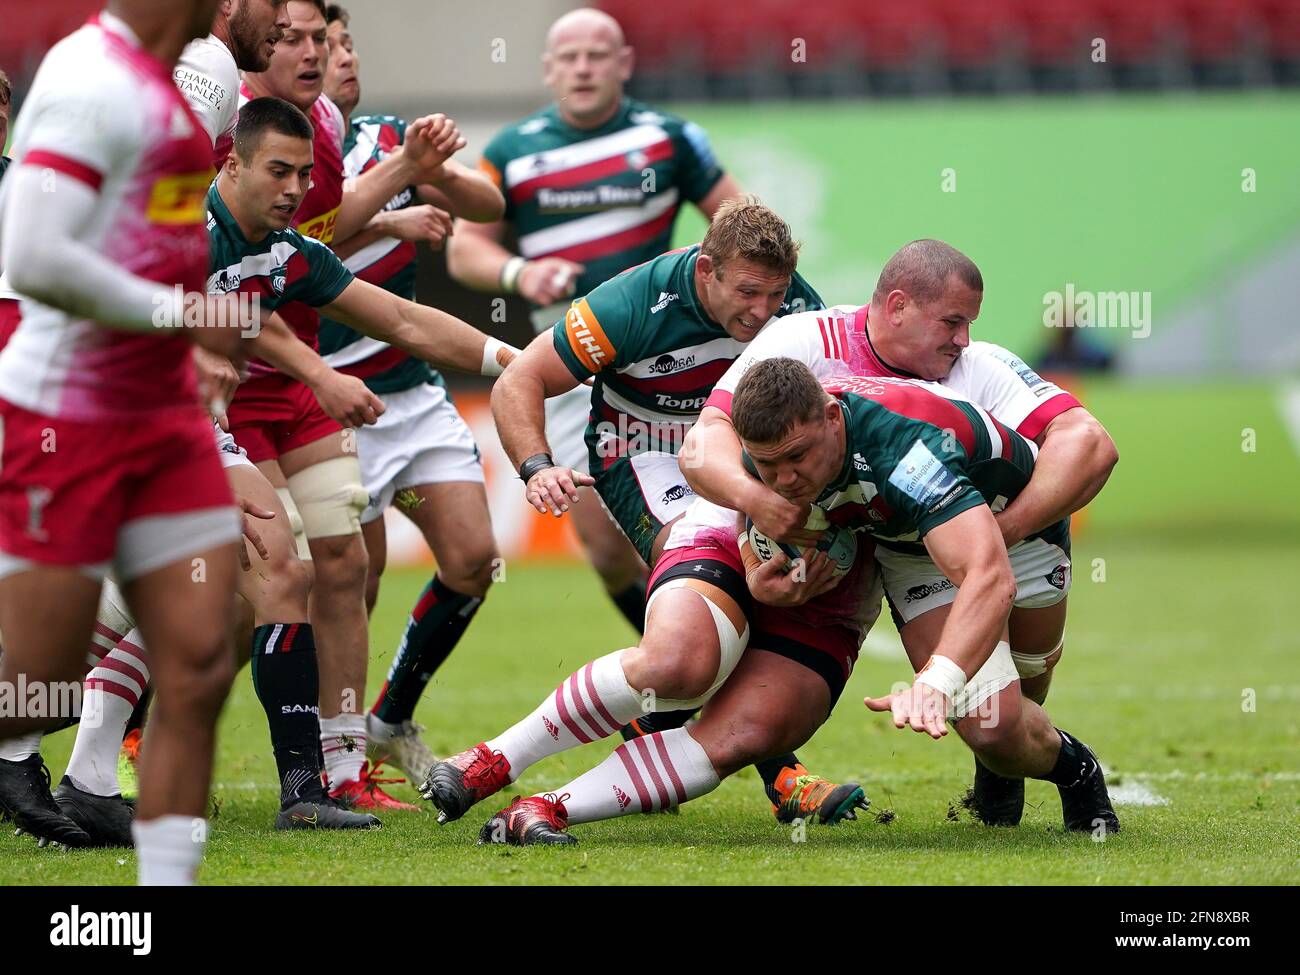 Leicester Tigers' Jasper Wiese (right) is tackled by Harlequins' Wilco Louw during the Gallagher Premiership match at Mattioli Woods Welford Road, Leicester. Picture date: Saturday May 15, 2021. Stock Photo